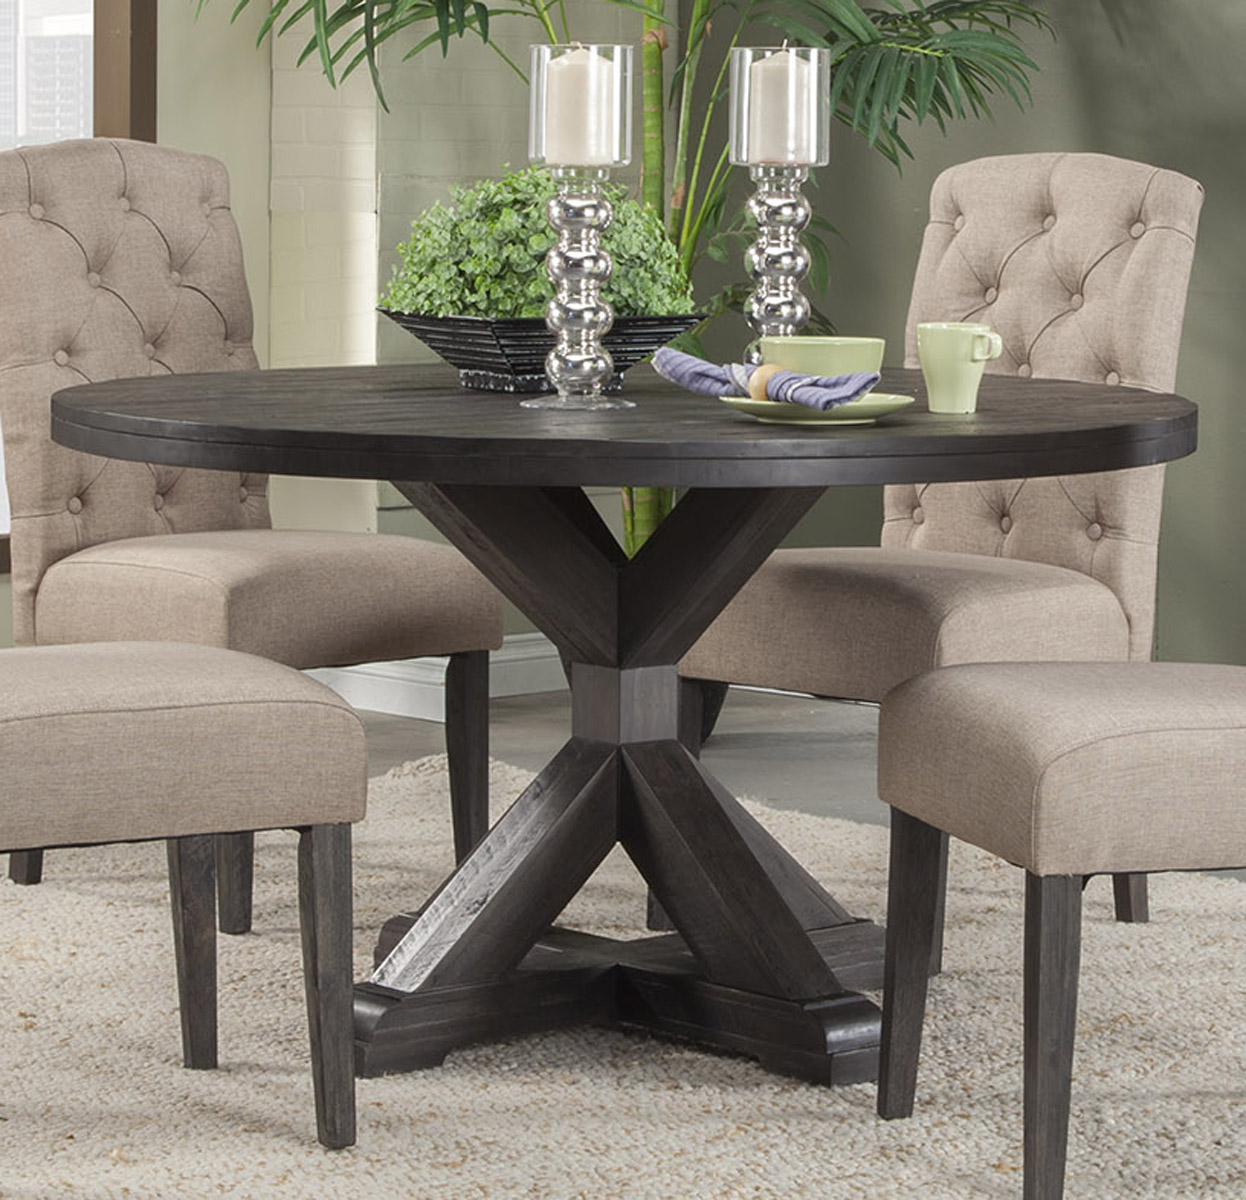 Alpine Furniture Newberry round dining table in old gray 1468-25 by EDIYURY